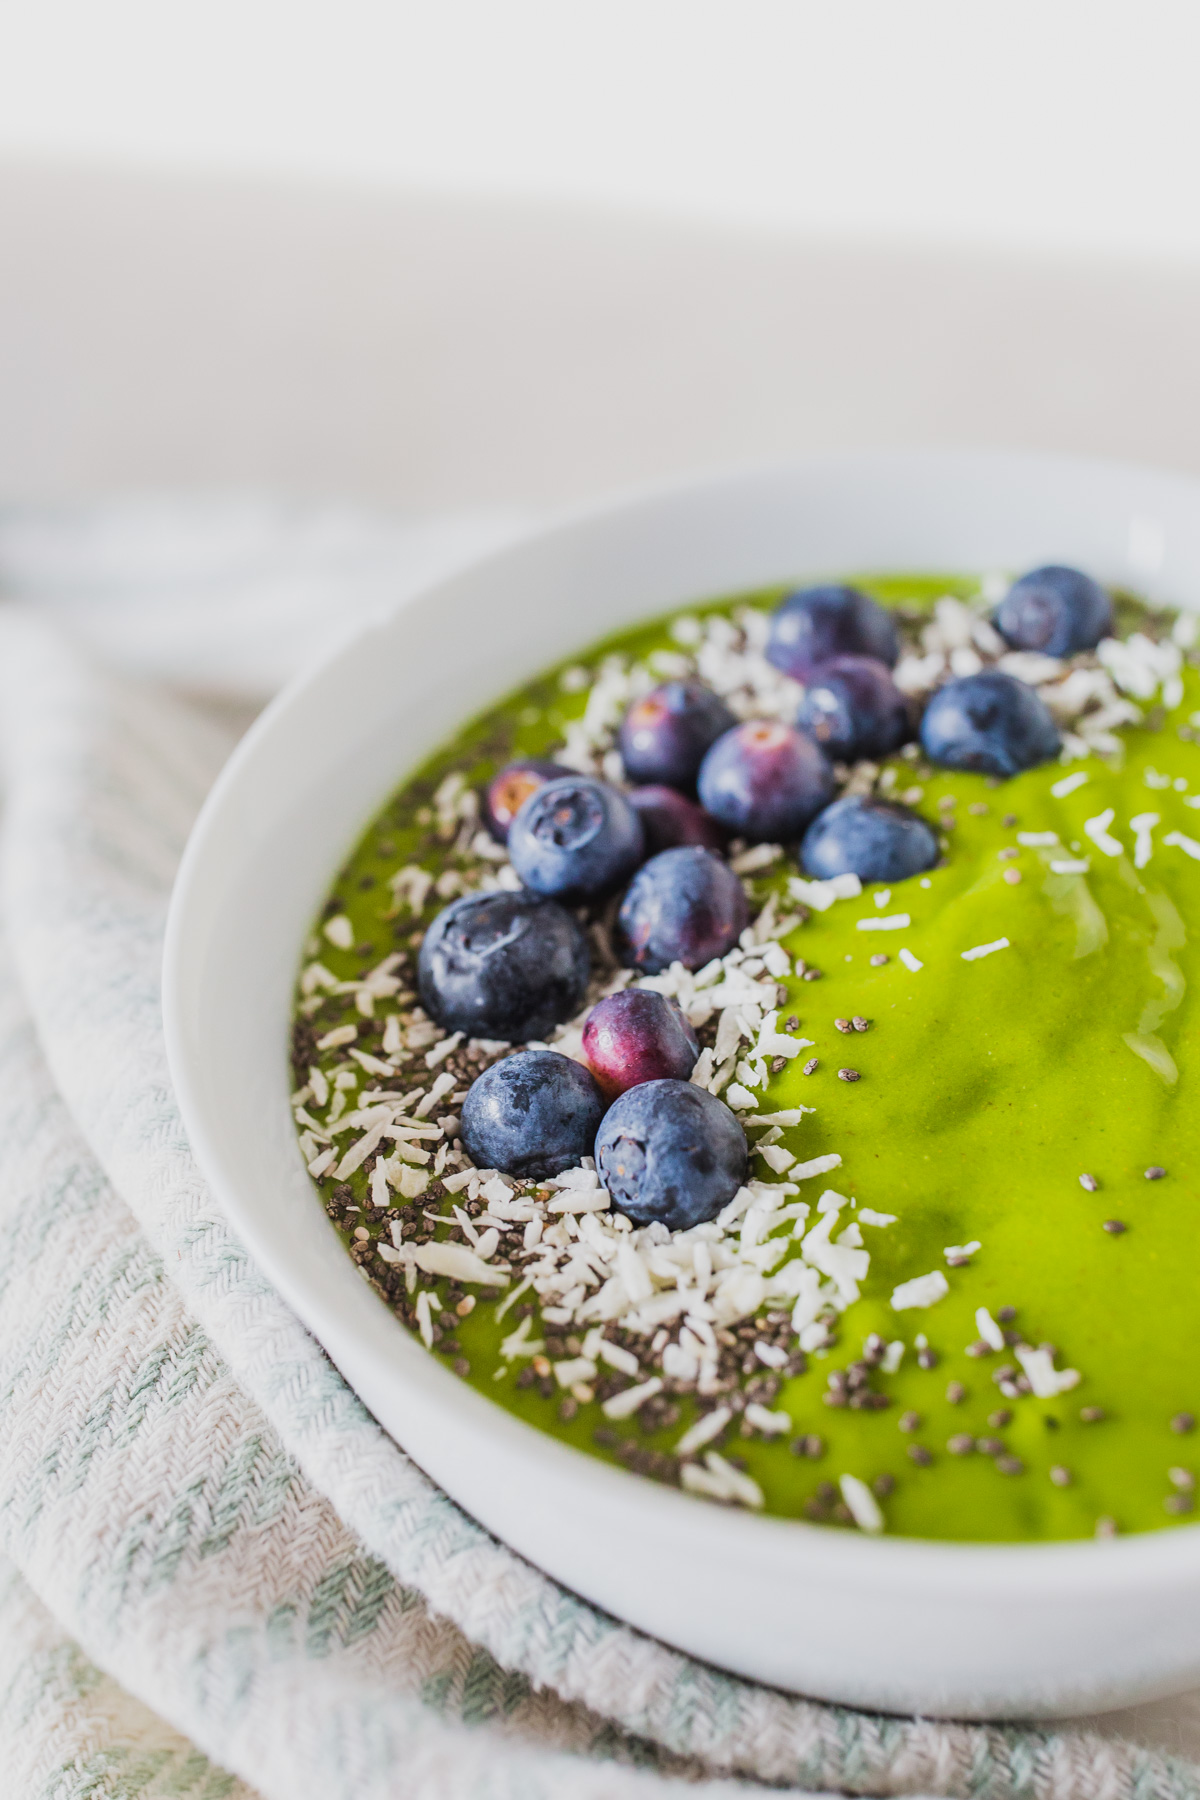 Looking for new ways to eat greens? This healthy green smoothie bowl is one of the easiest ways to get in your daily greens like spinach or kale and fruit! Healthy eating for beginners doesn't have to be difficult, and this green smoothie recipe makes it taste delicious! This easy smoothie bowl recipes is a natural energy booster and immunity booster! Click through for my spinach smoothie recipe that tastes like a tropical drink. #greensmoothie #smoothiebowlrecipes